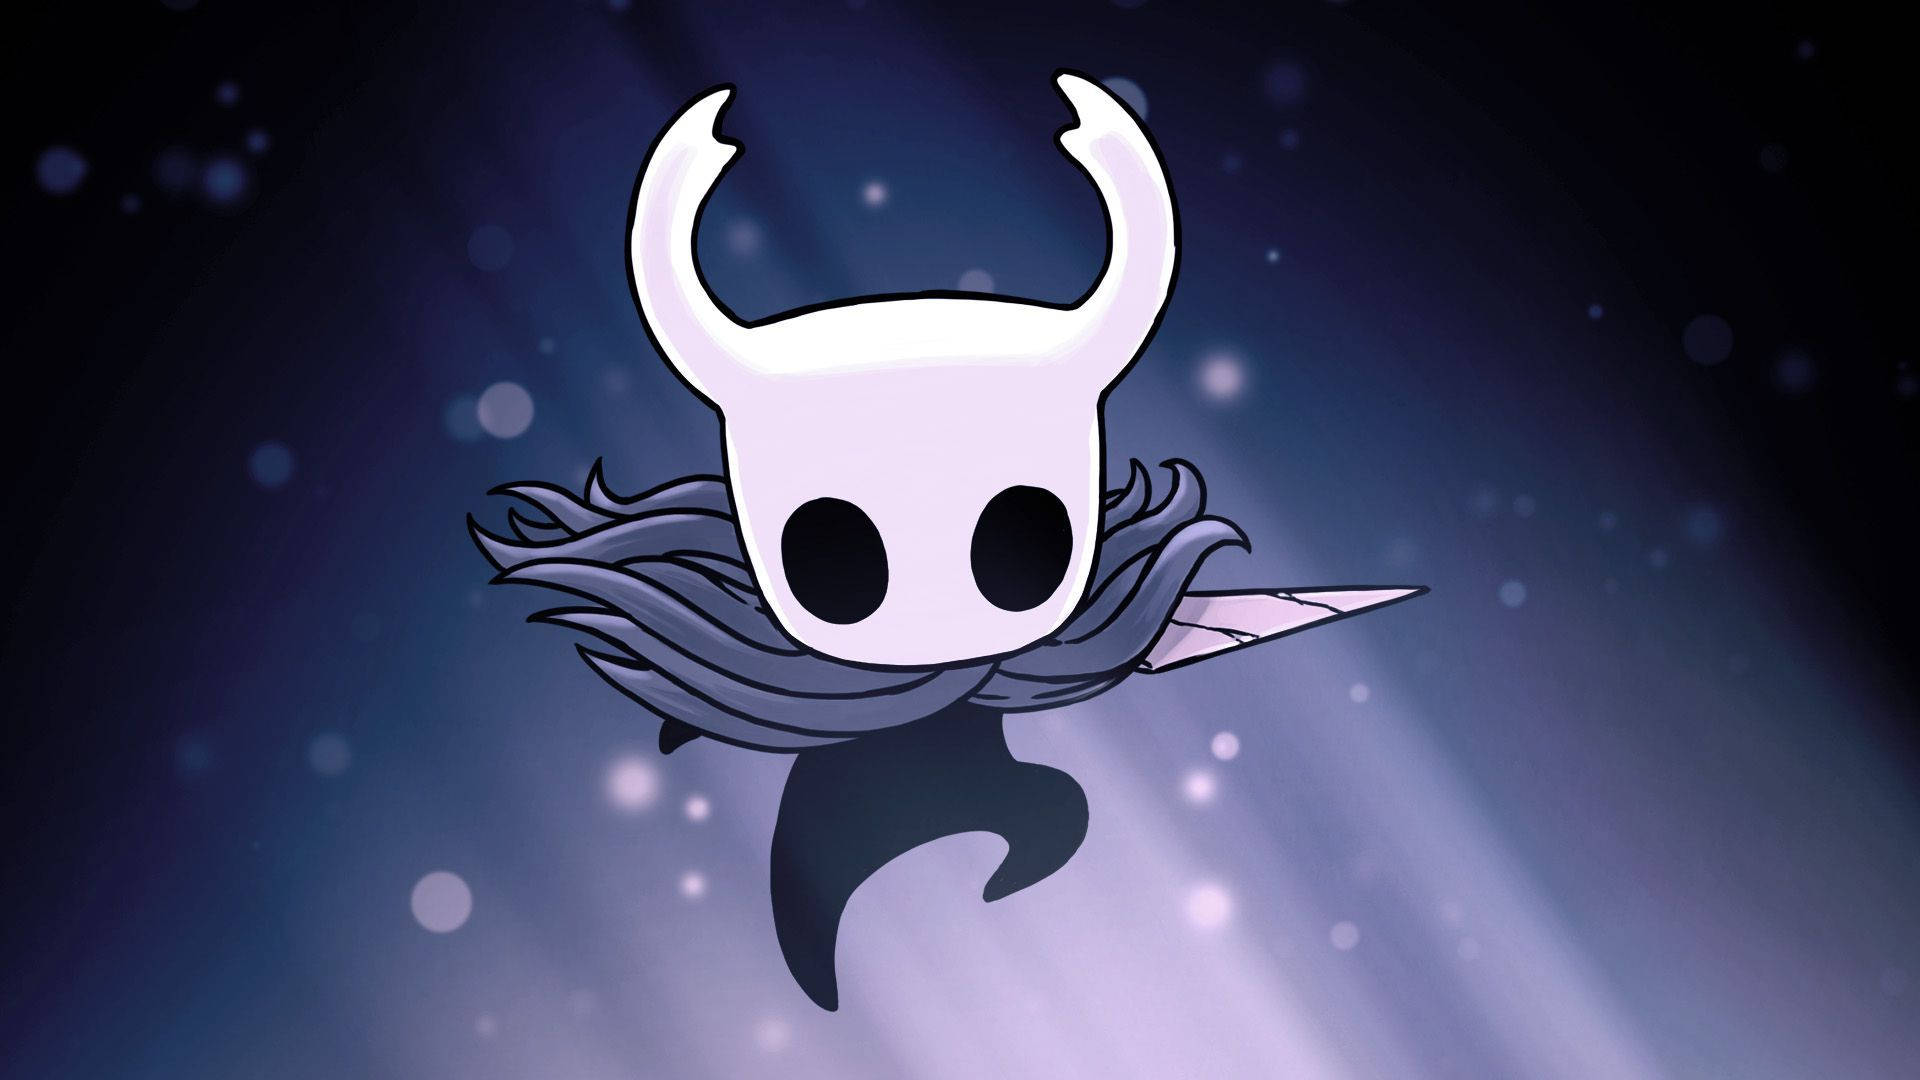 Beautiful 2D art inspired by the game Hollow Knight Wallpaper